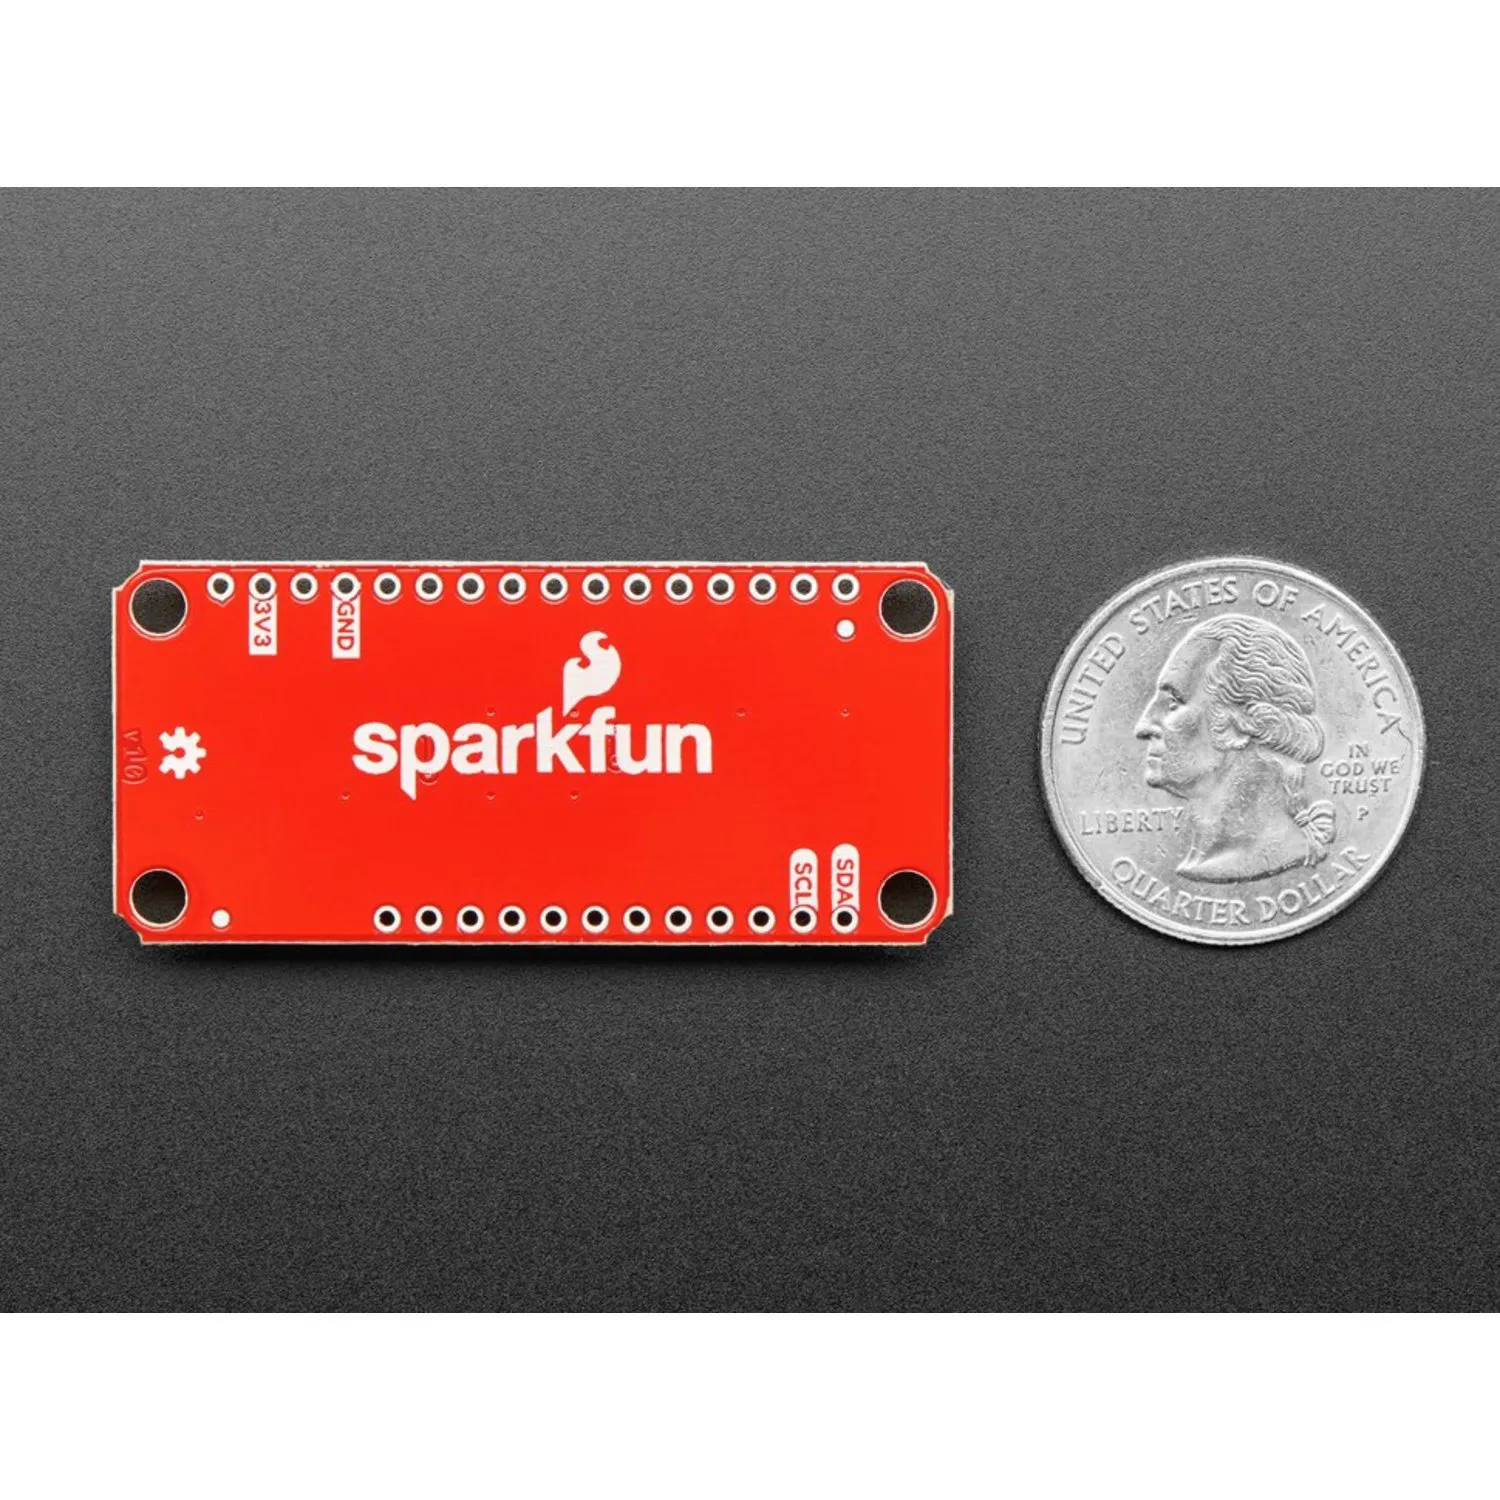 Photo of SparkFun Qwiic / Stemma QT FeatherWing (Shield for Thing Plus)